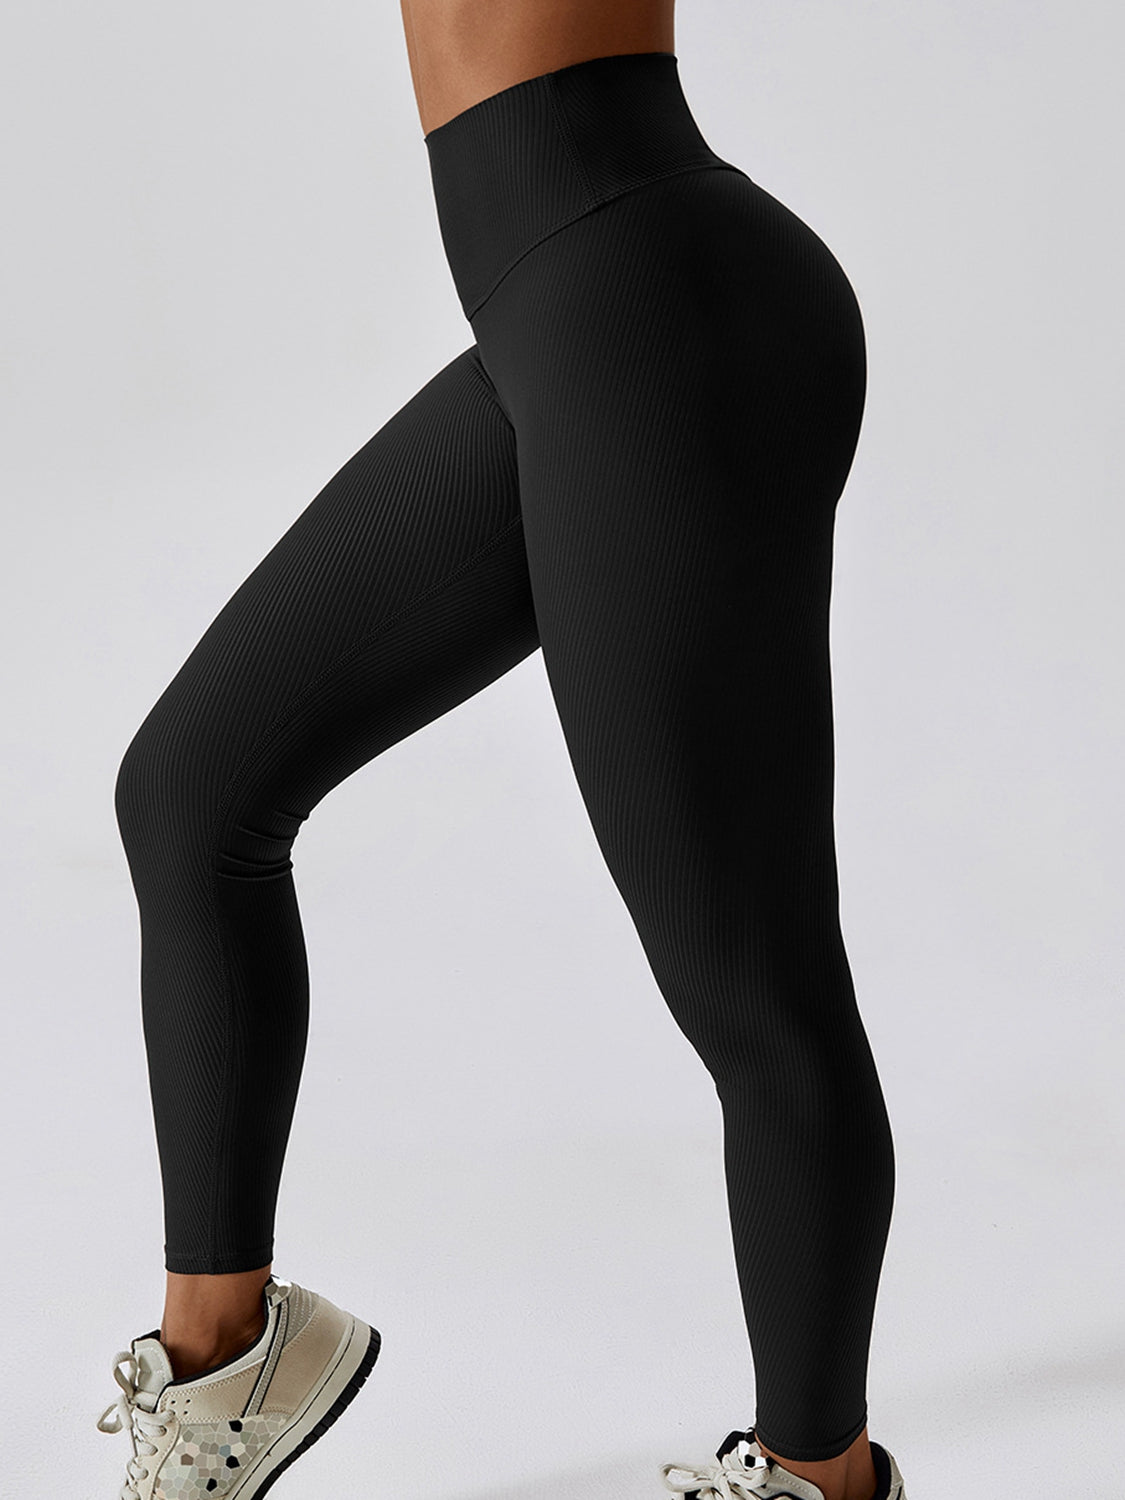 Wide Waistband Slim Fit Sports Pants Other Colors Available